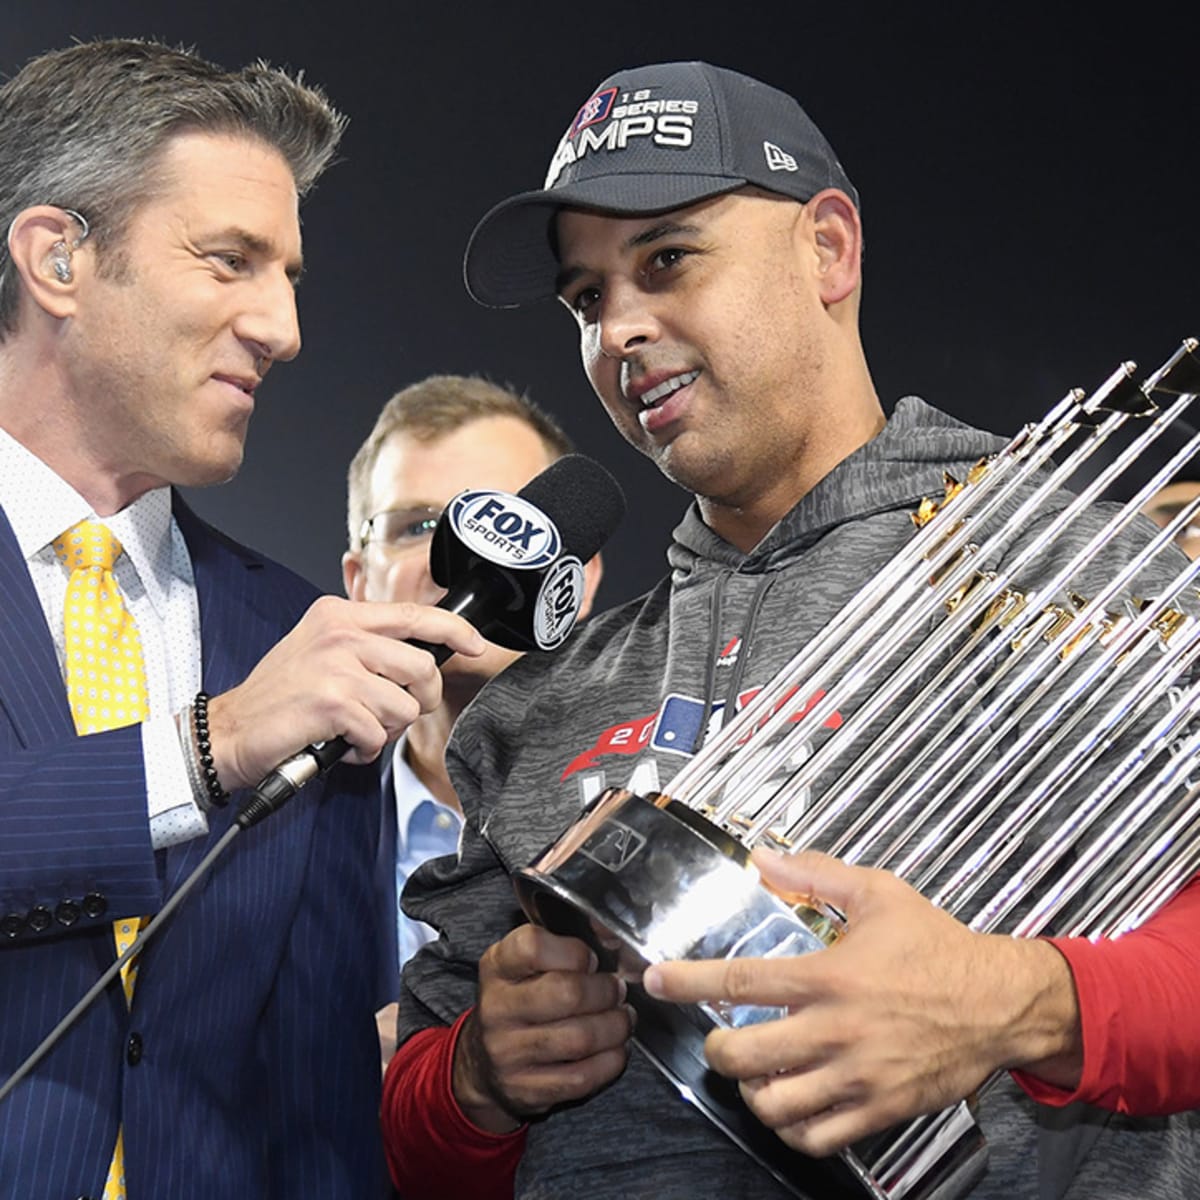 Playoff Prospectus: Alex Cora, Puerto Rico, and a Good Night For